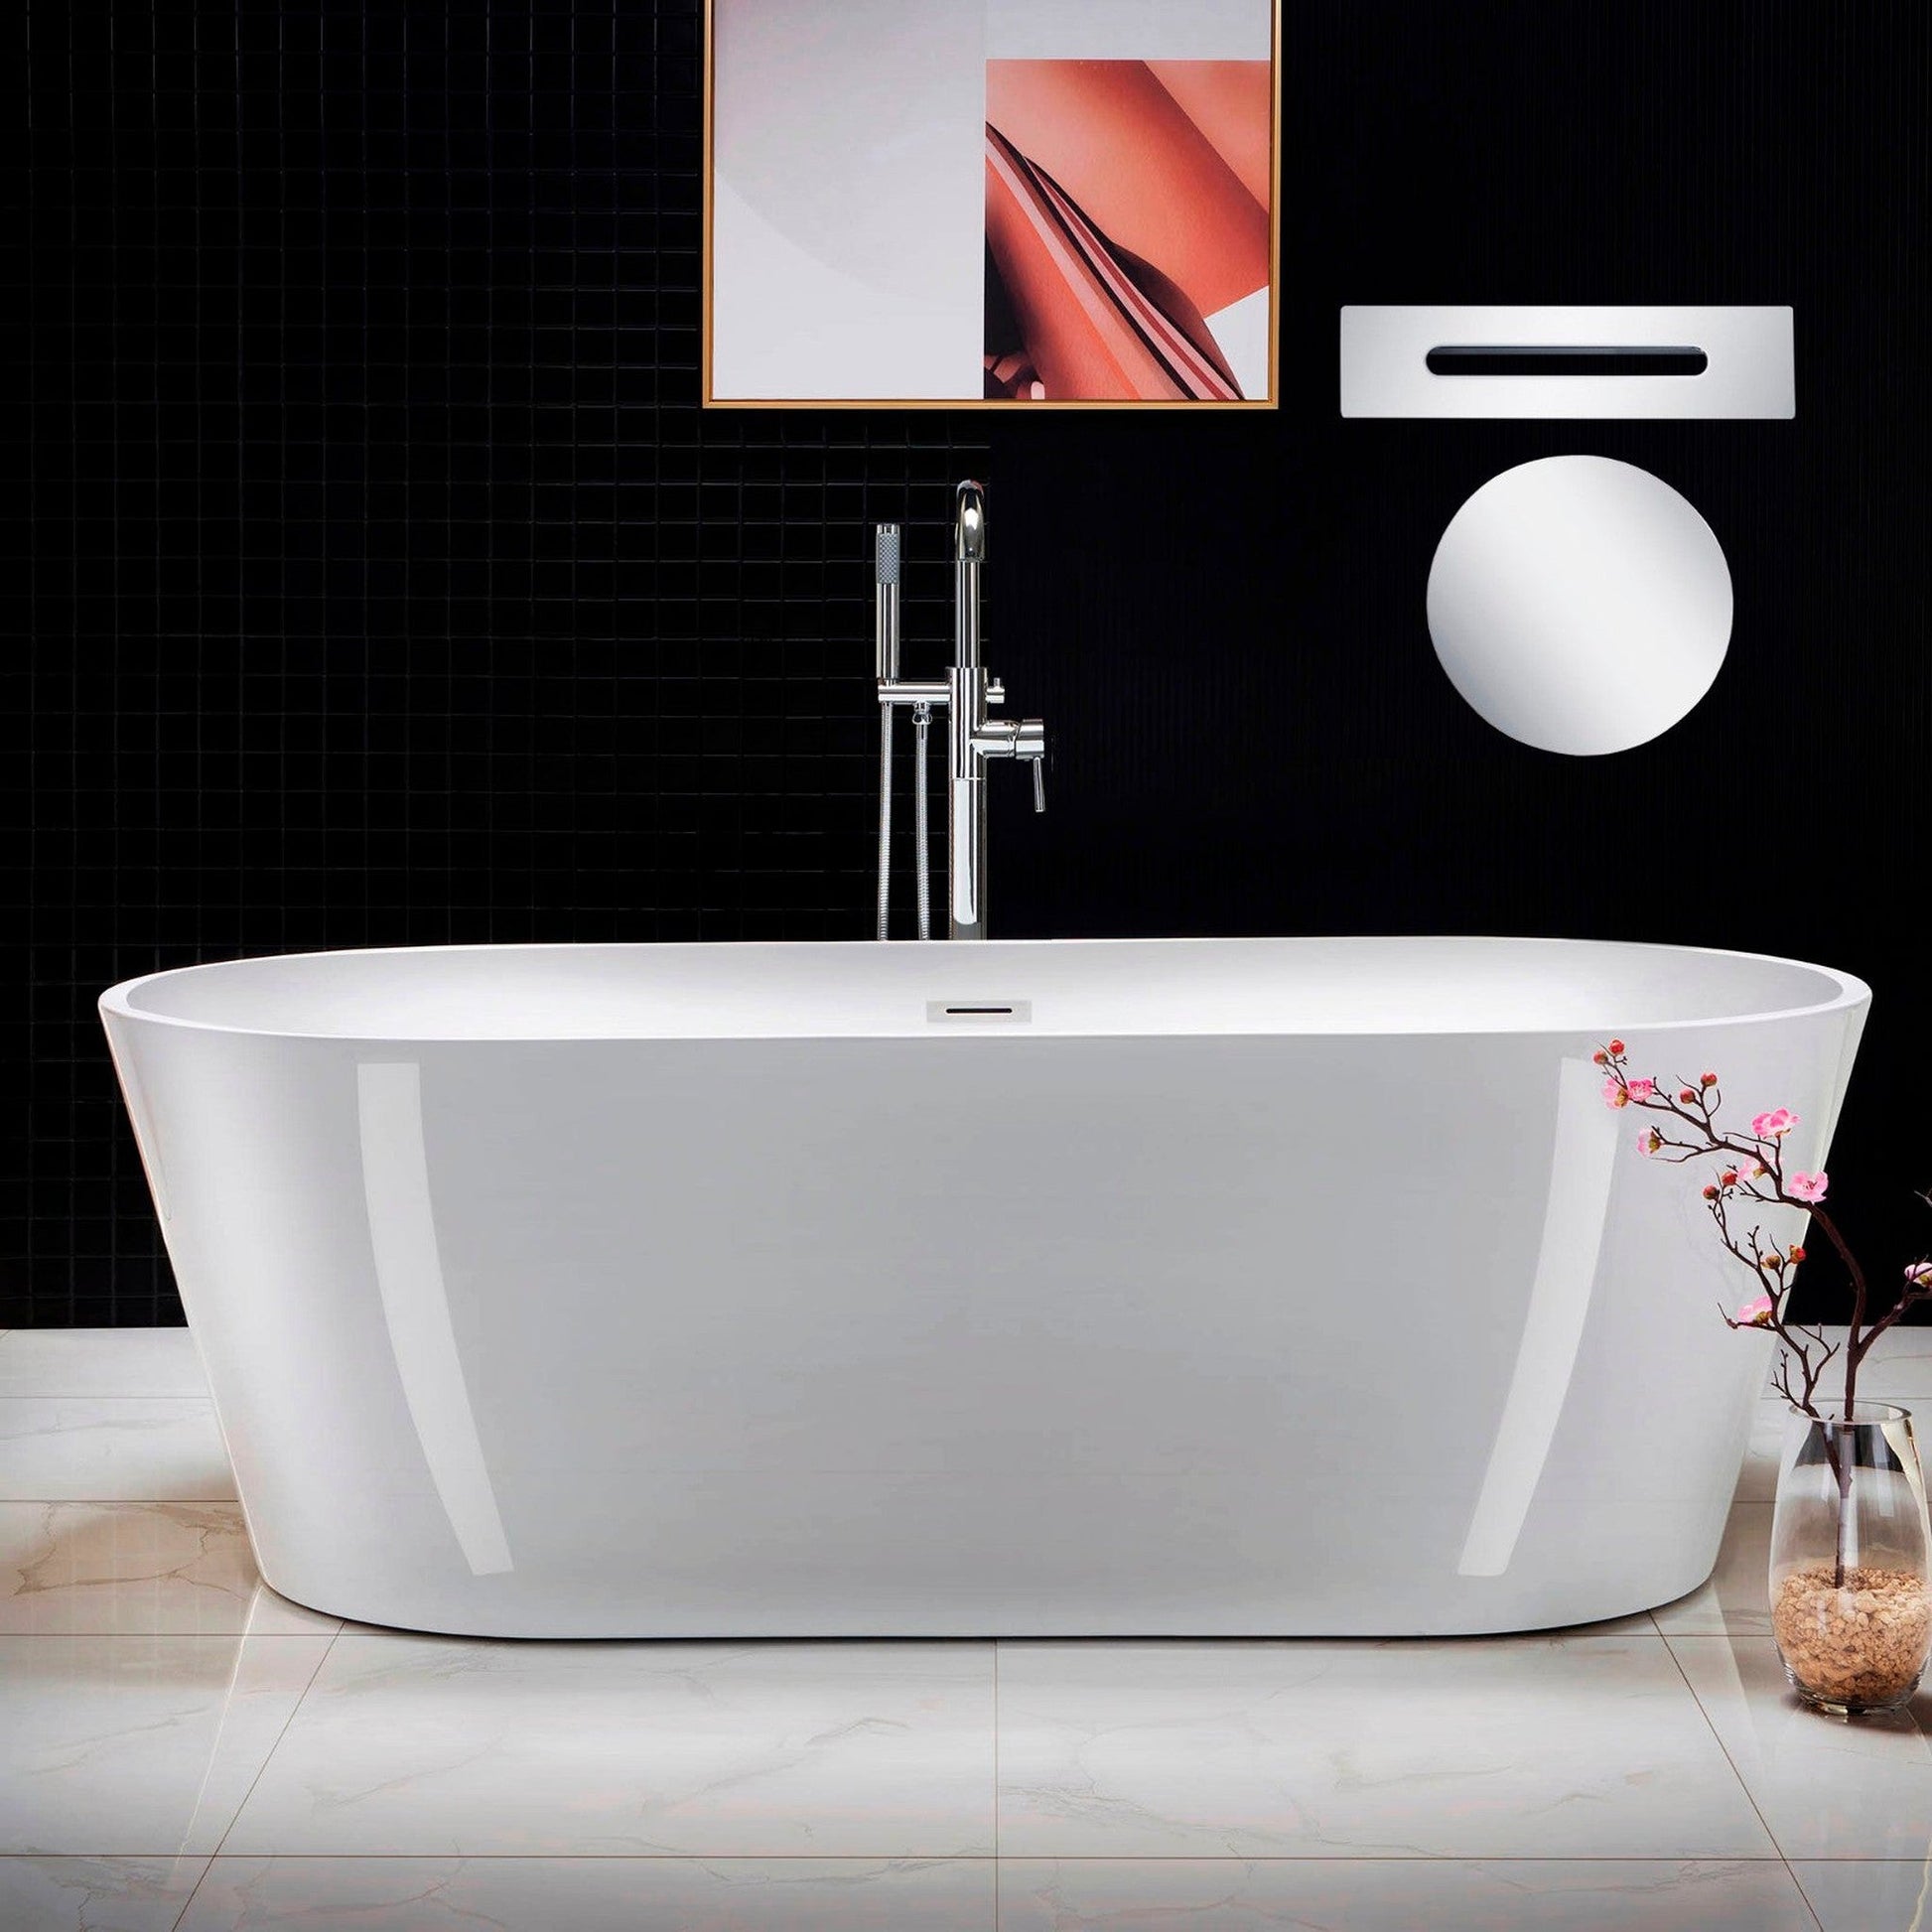 WoodBridge 71" White Acrylic Freestanding Contemporary Soaking Bathtub With Chrome Drain, Overflow, F0002CHVT Tub Filler and Caddy Tray